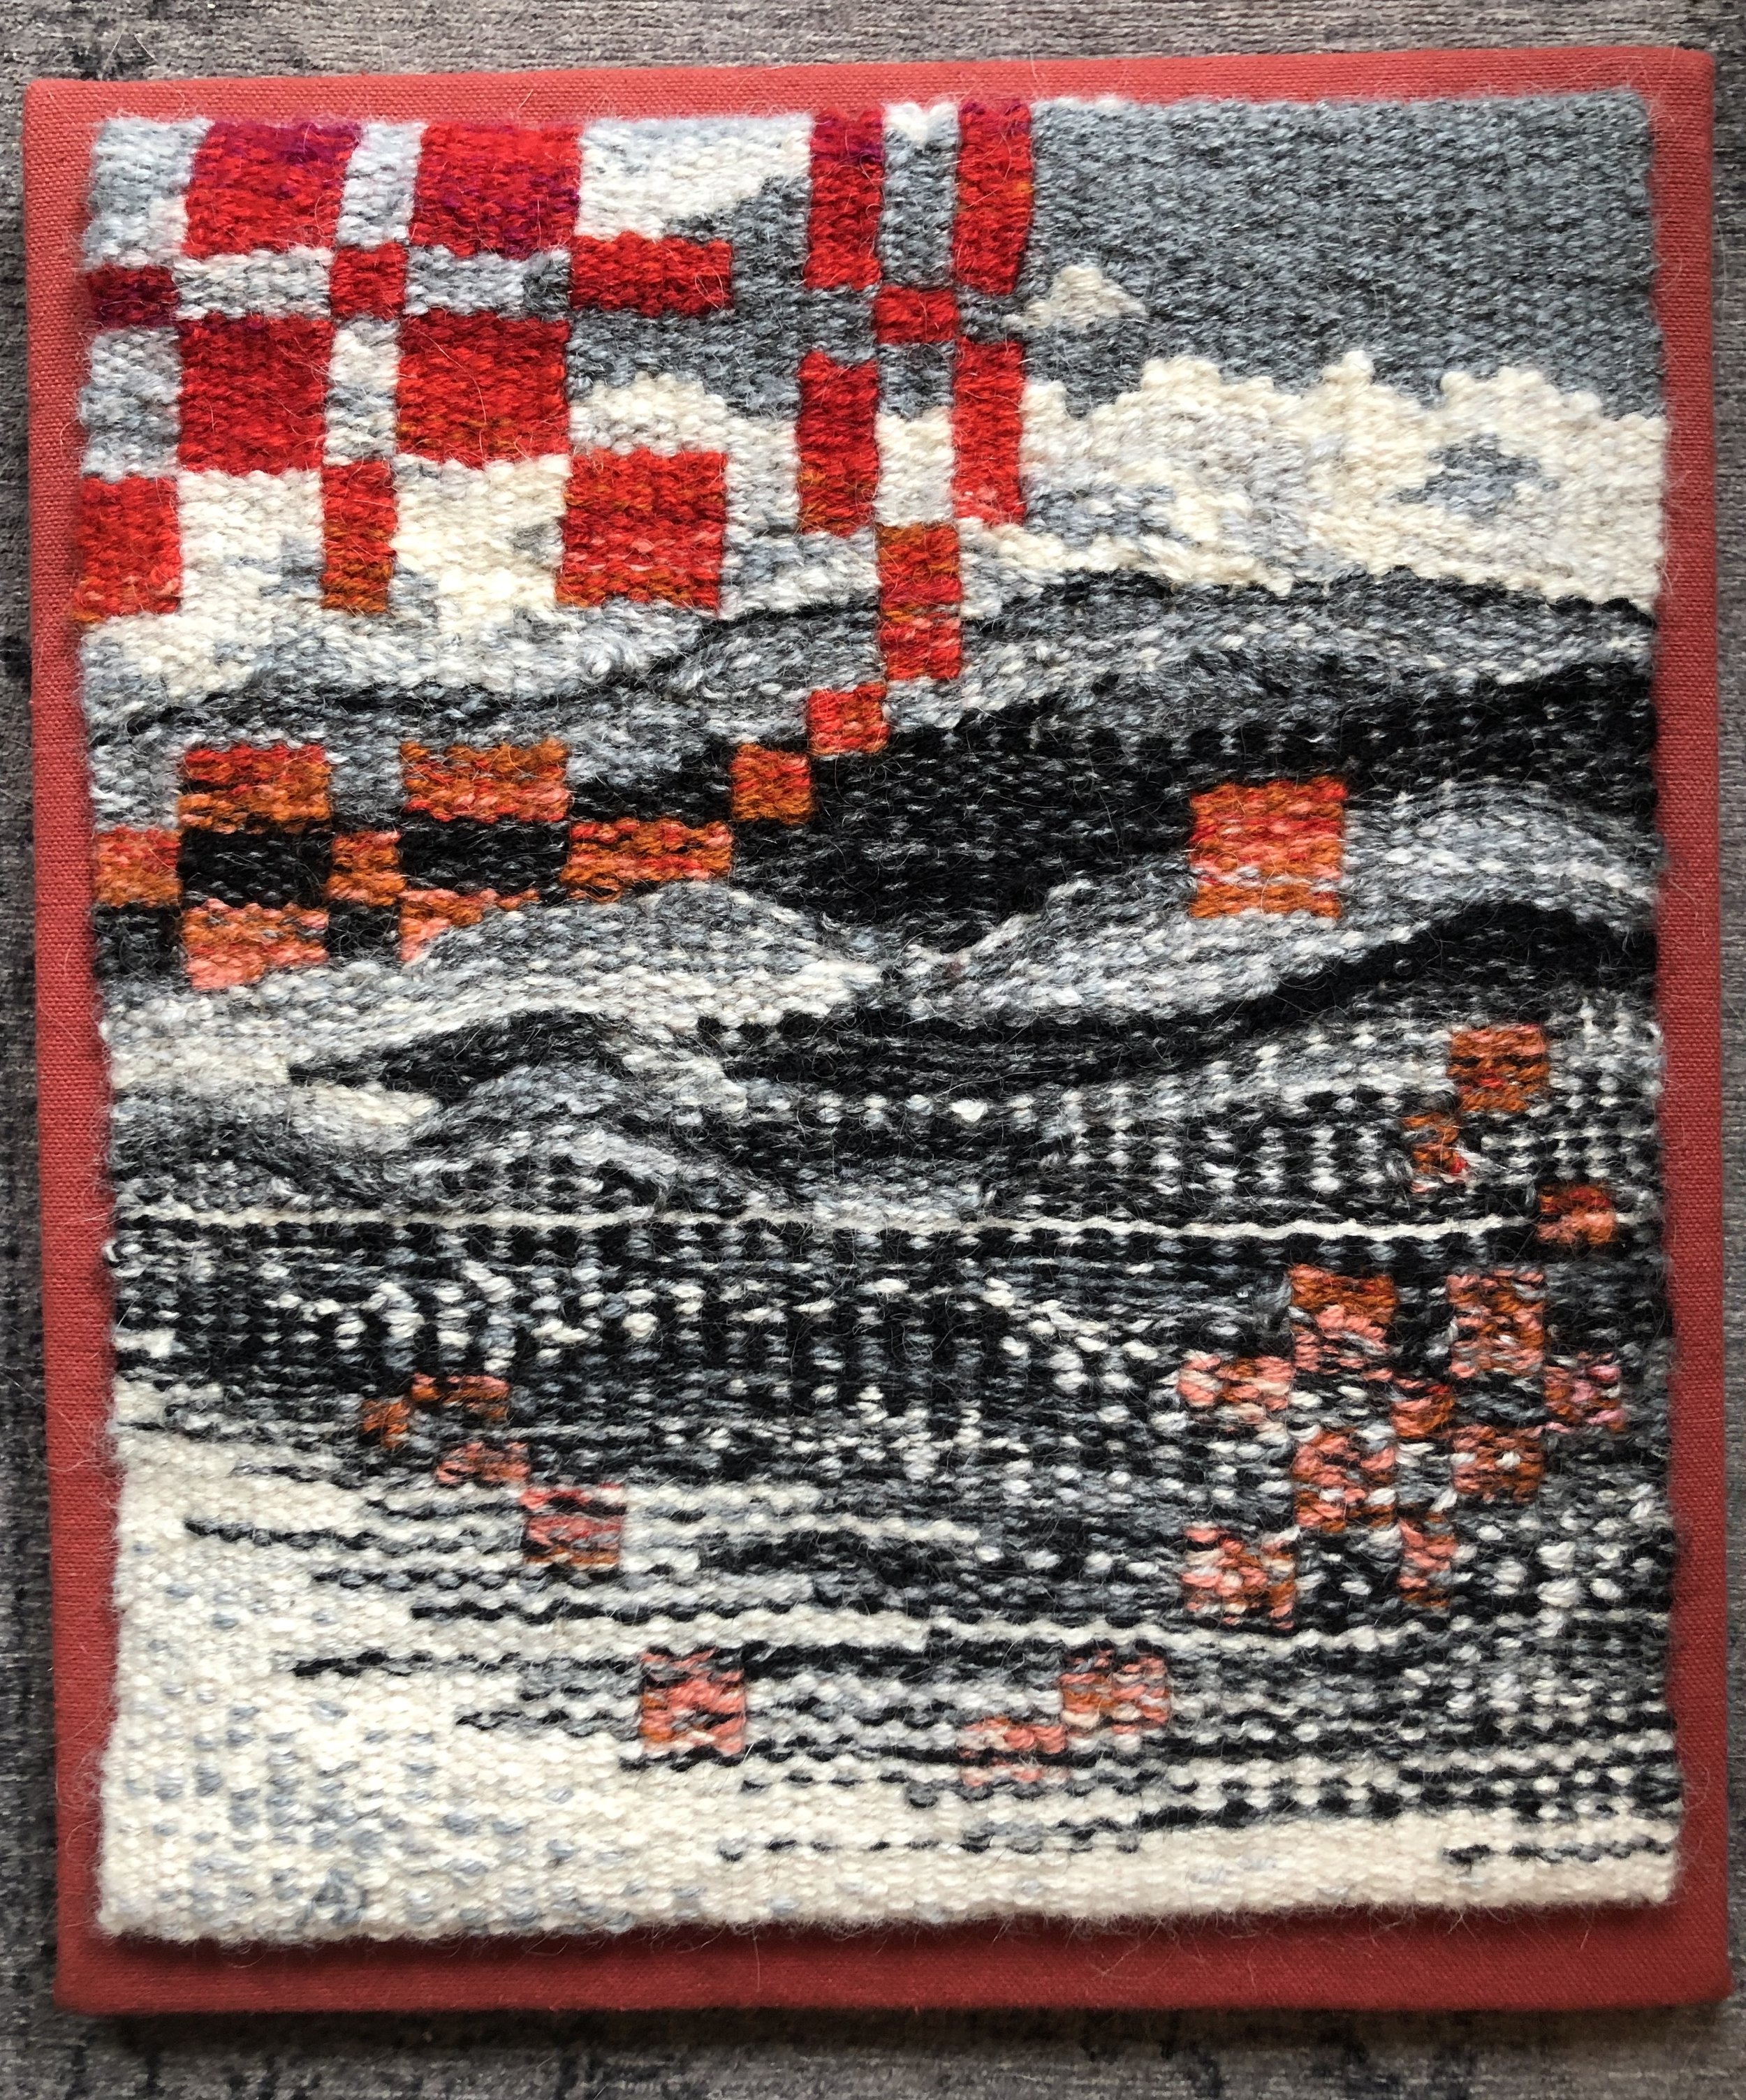   Roses , 2019. Cotton warp and wool weft. 10.5” x 13”. 